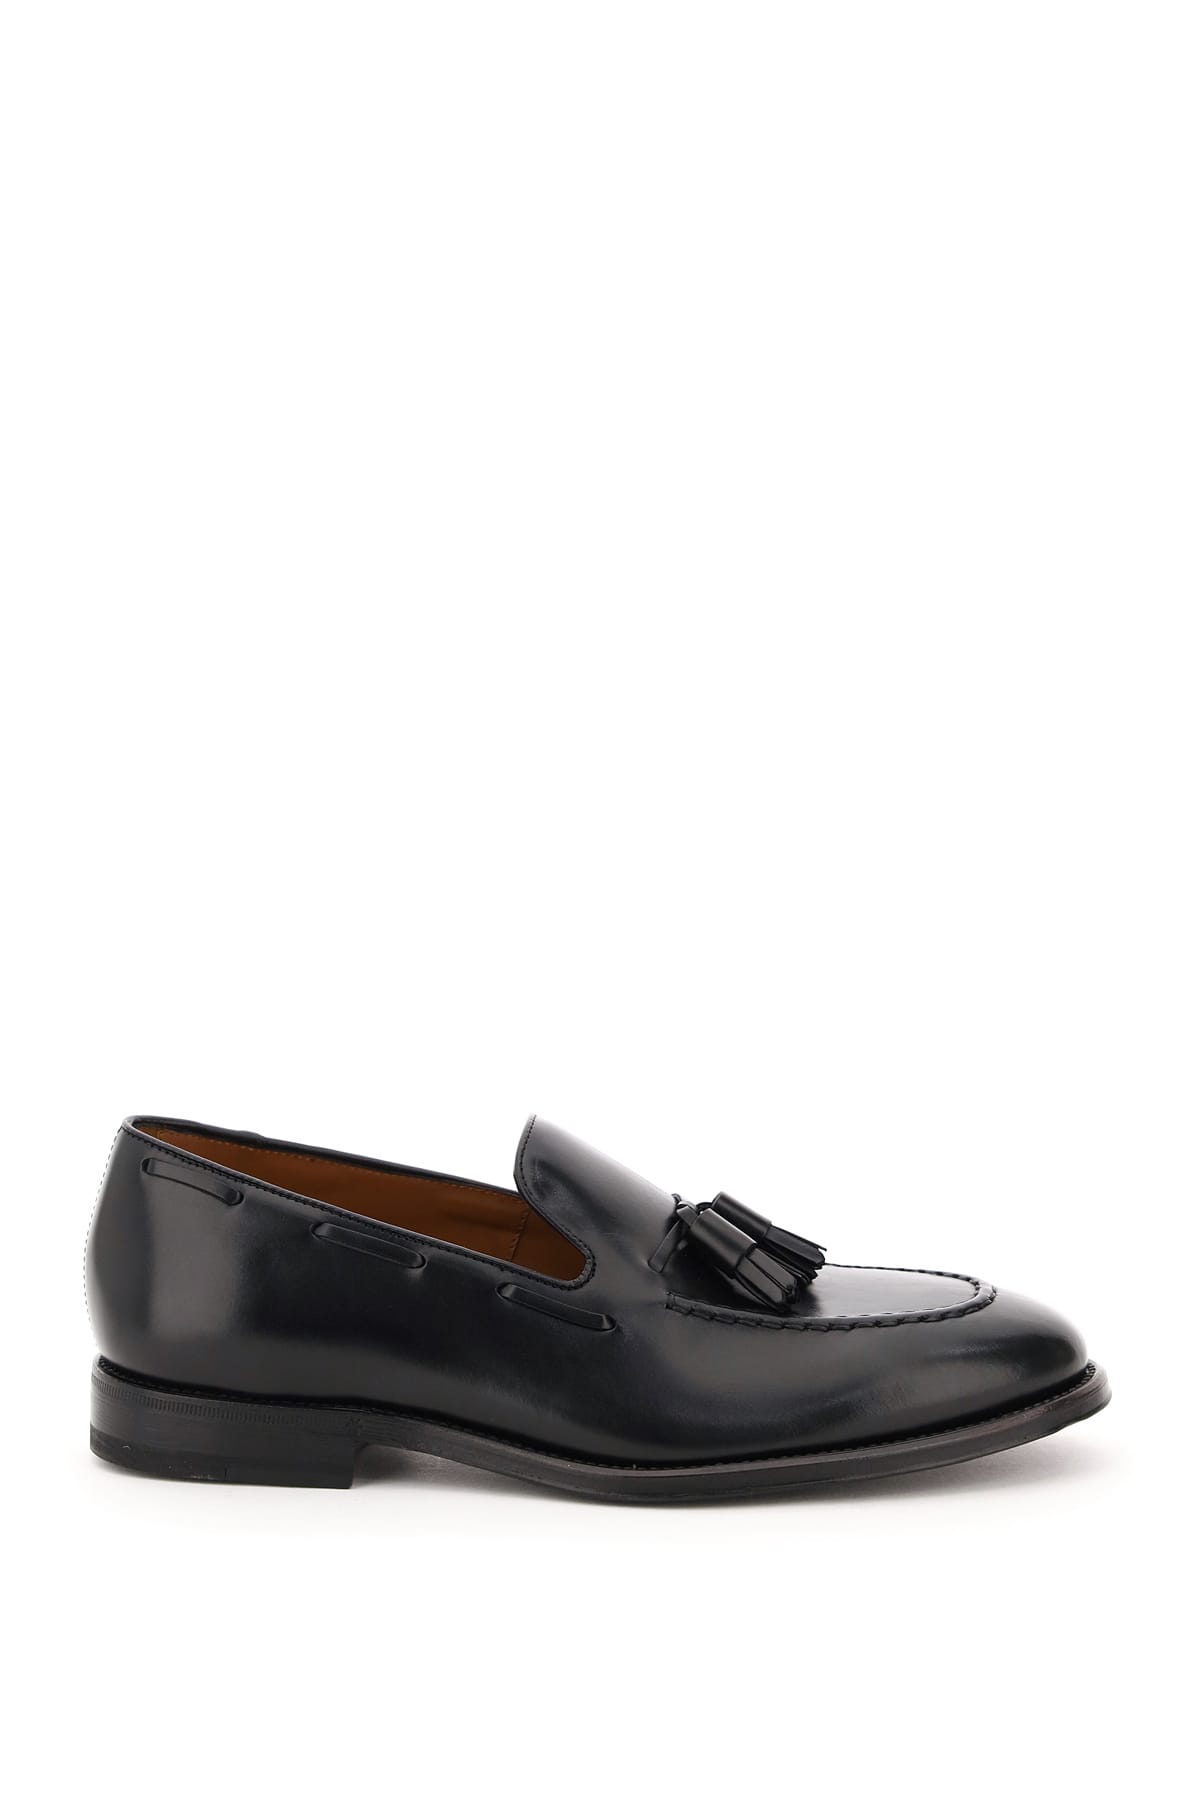 Henderson Baracco Leather Loafers With Tassels